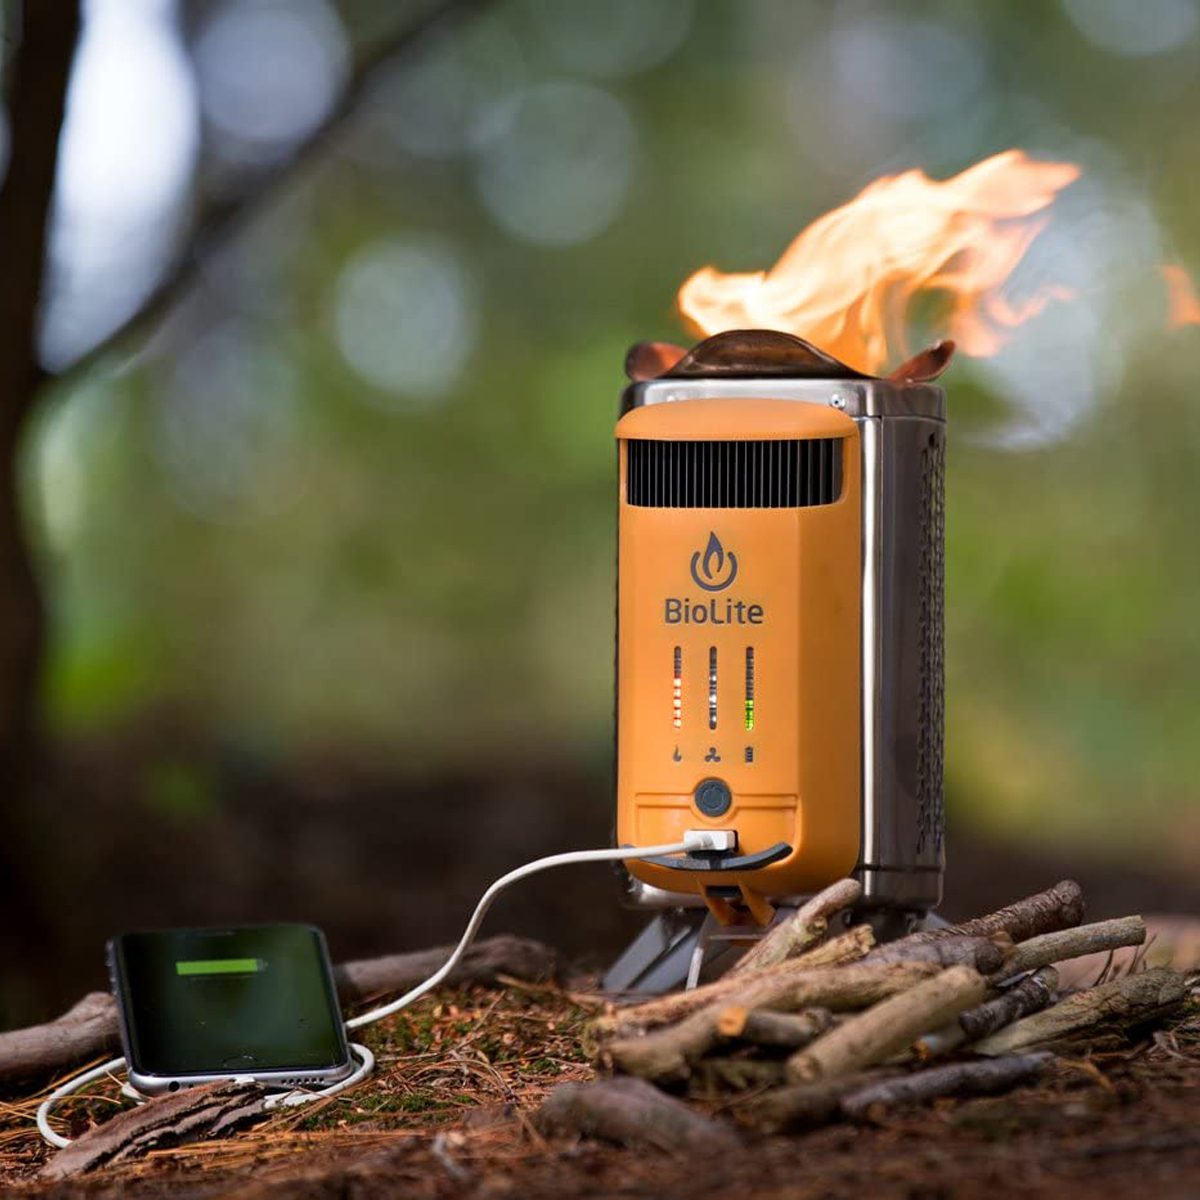 10 Cool Camping Gadgets You Need This | Family Handyman